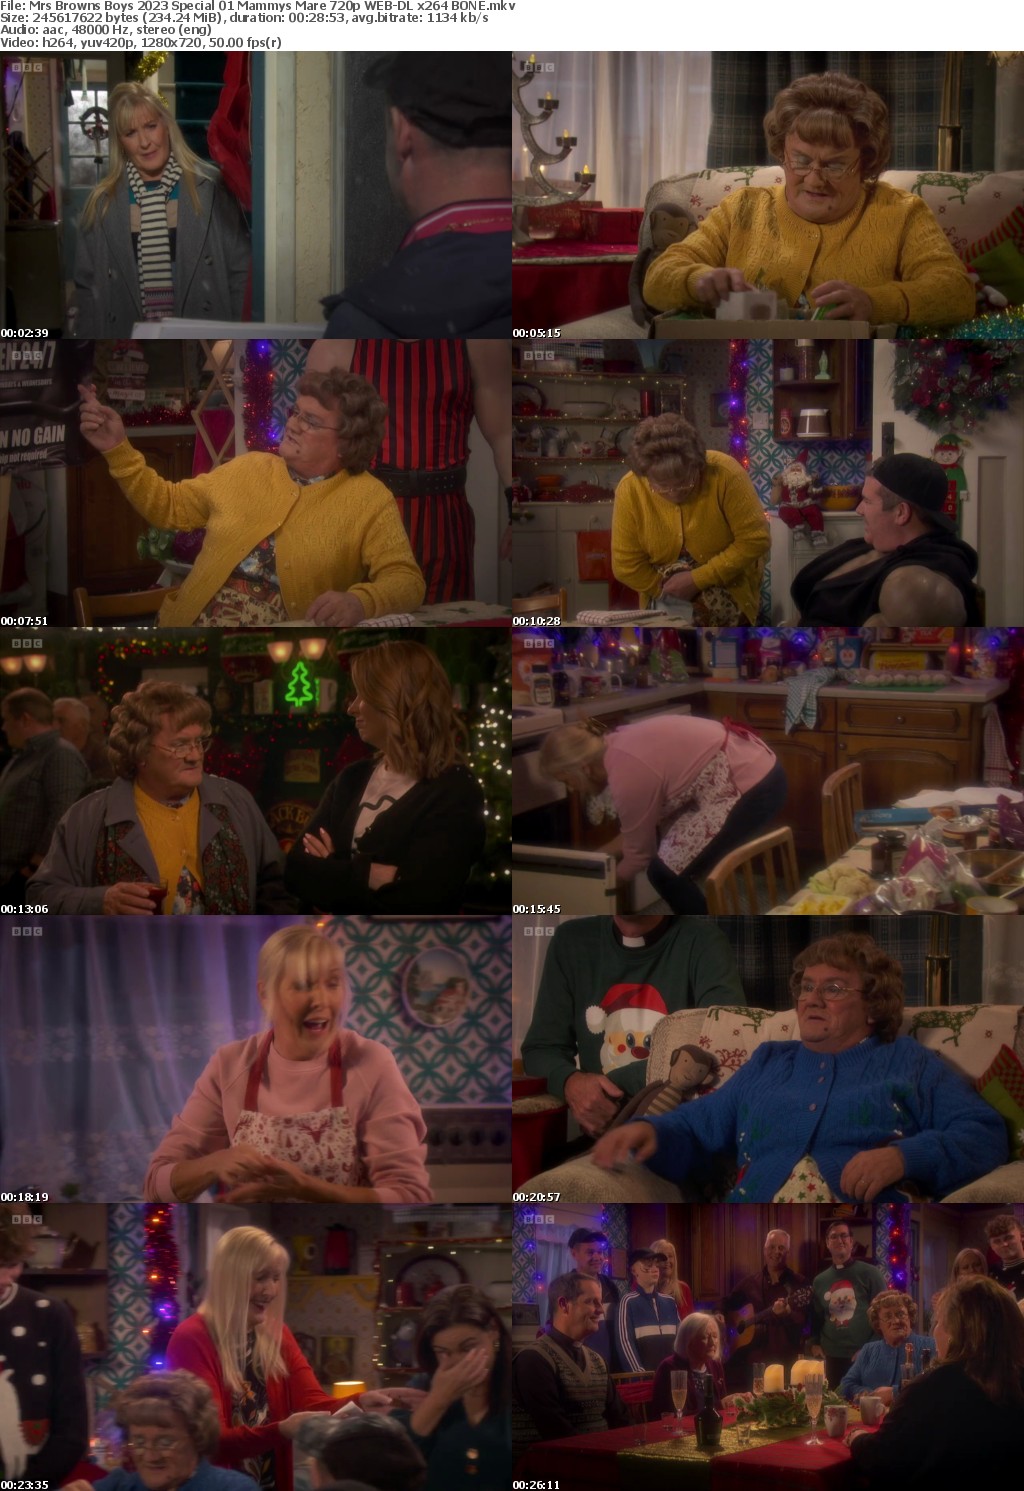 Mrs Browns Boys 2023 Special 01 Mammys Mare 720p WEB-DL x264 BONE